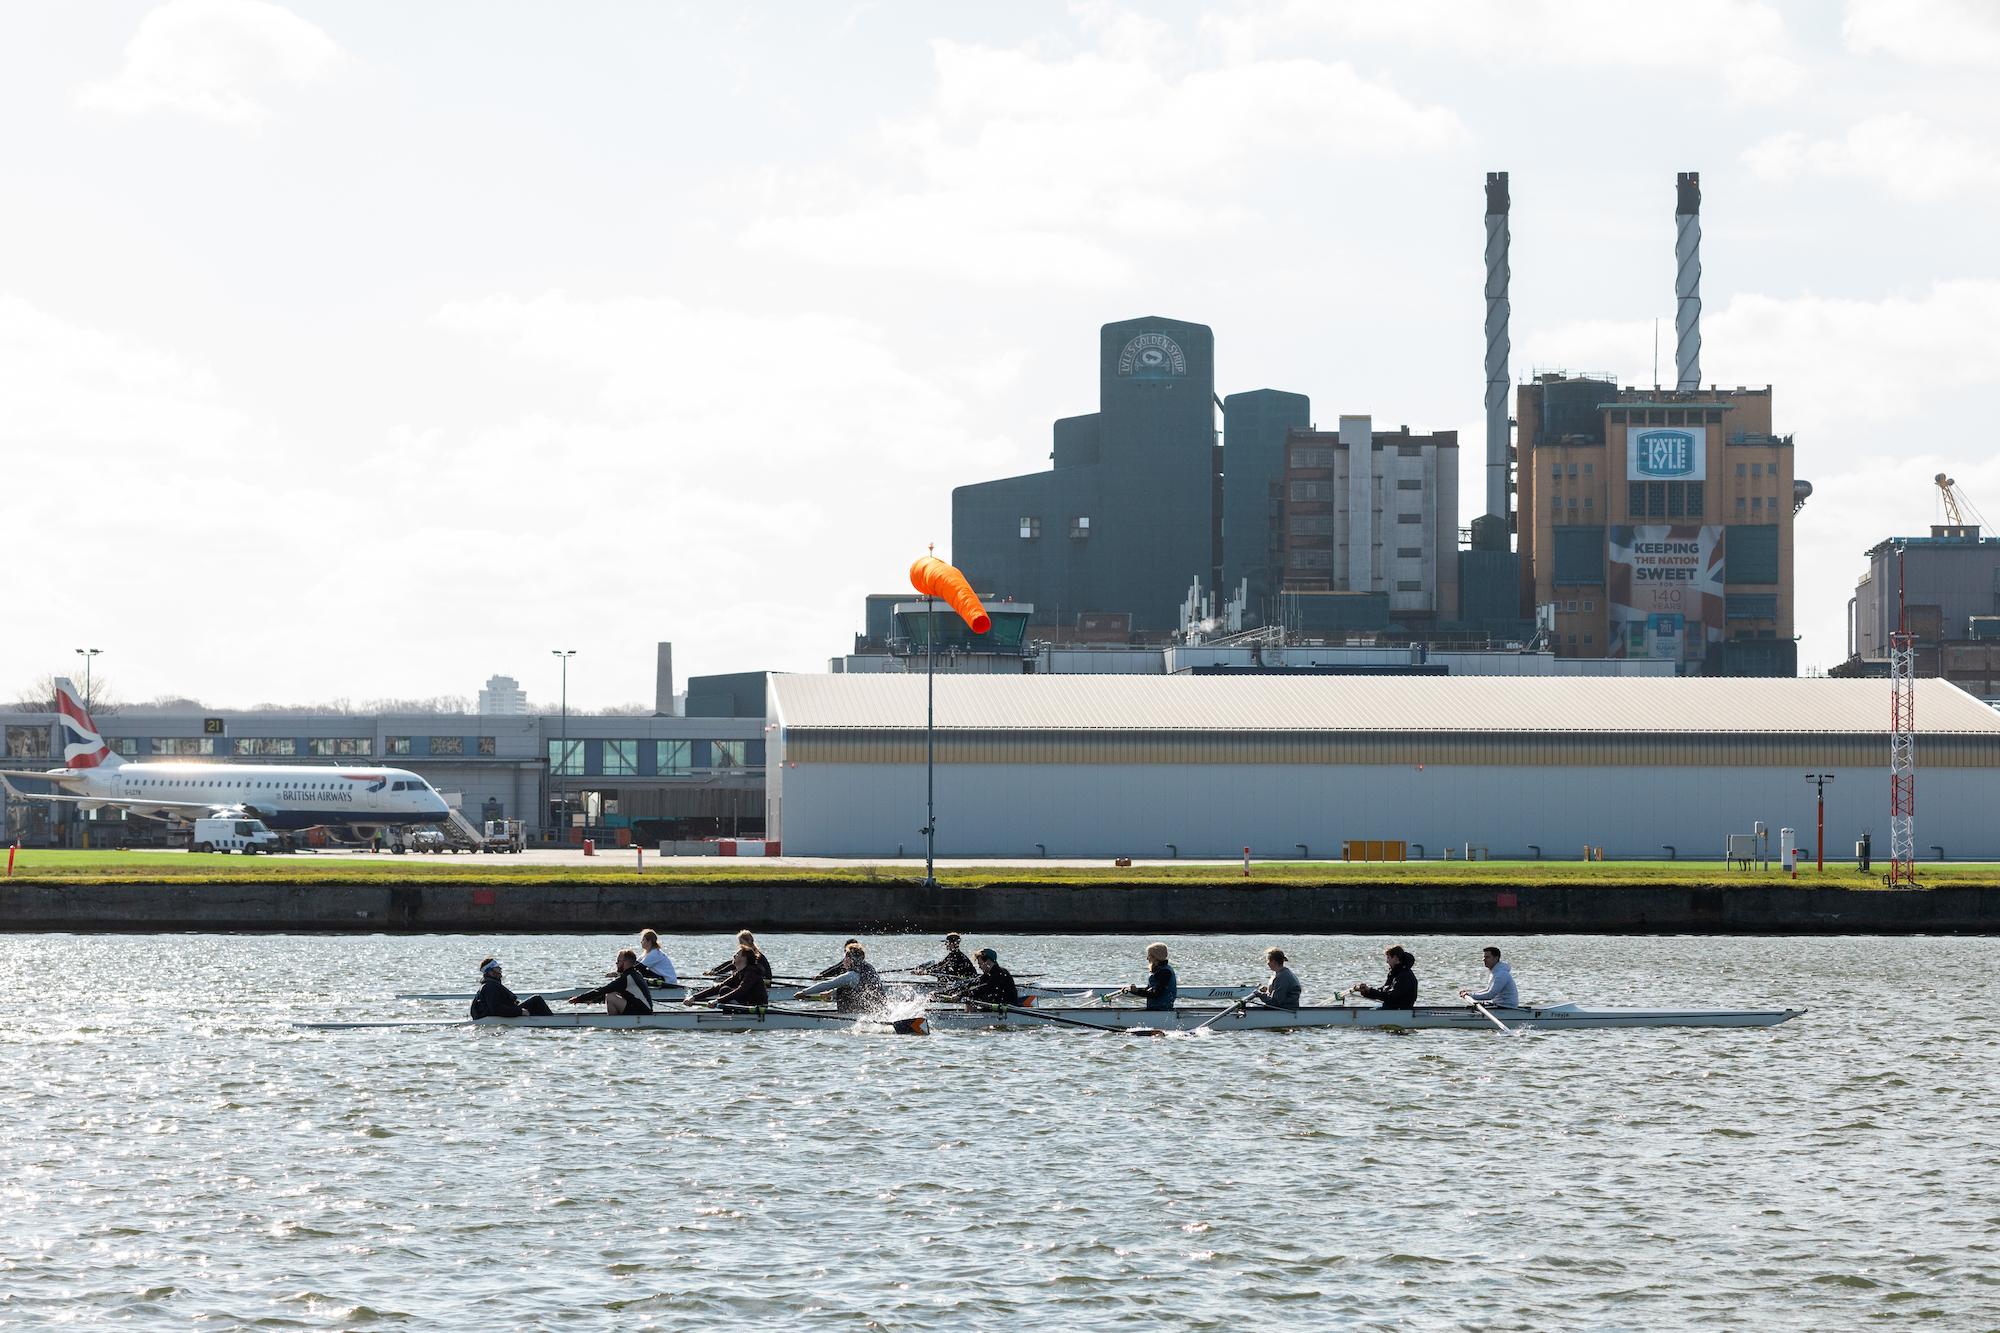 rowers on the water with city airport and tate and lyle factory in the background